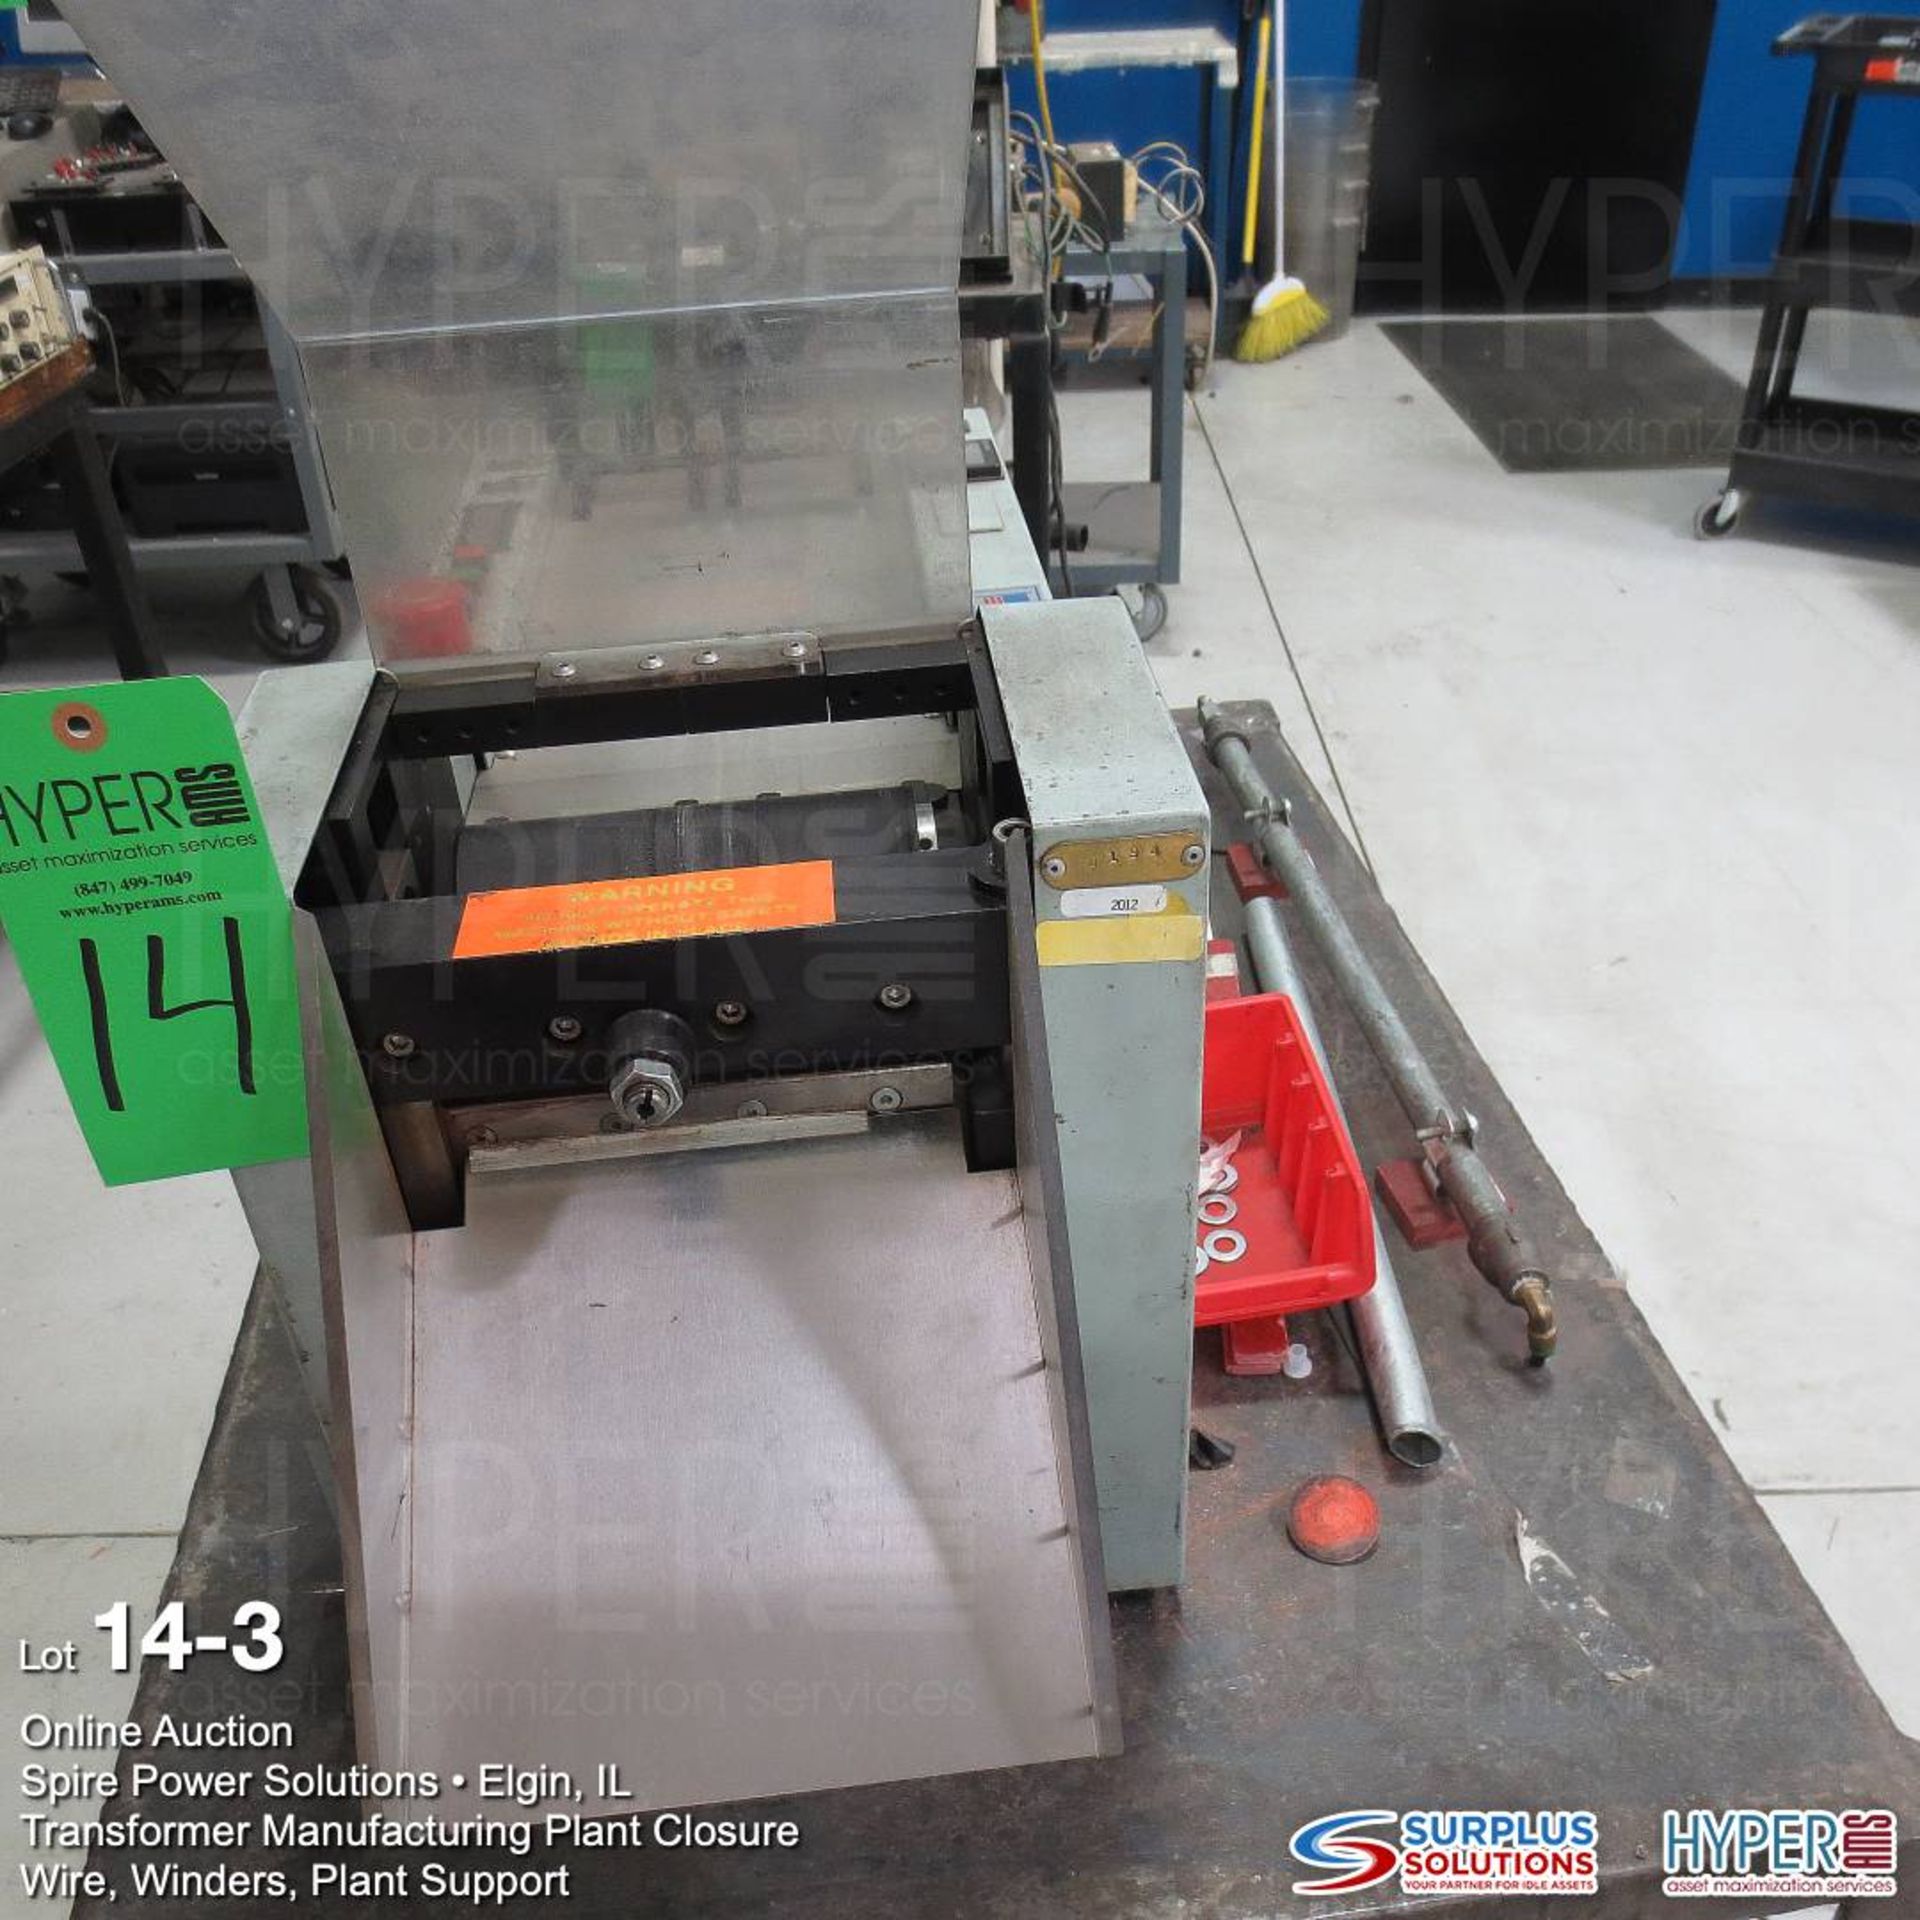 Artos C-4 measuring and cutoff machine s/n M55994-1 with cart - Image 3 of 5